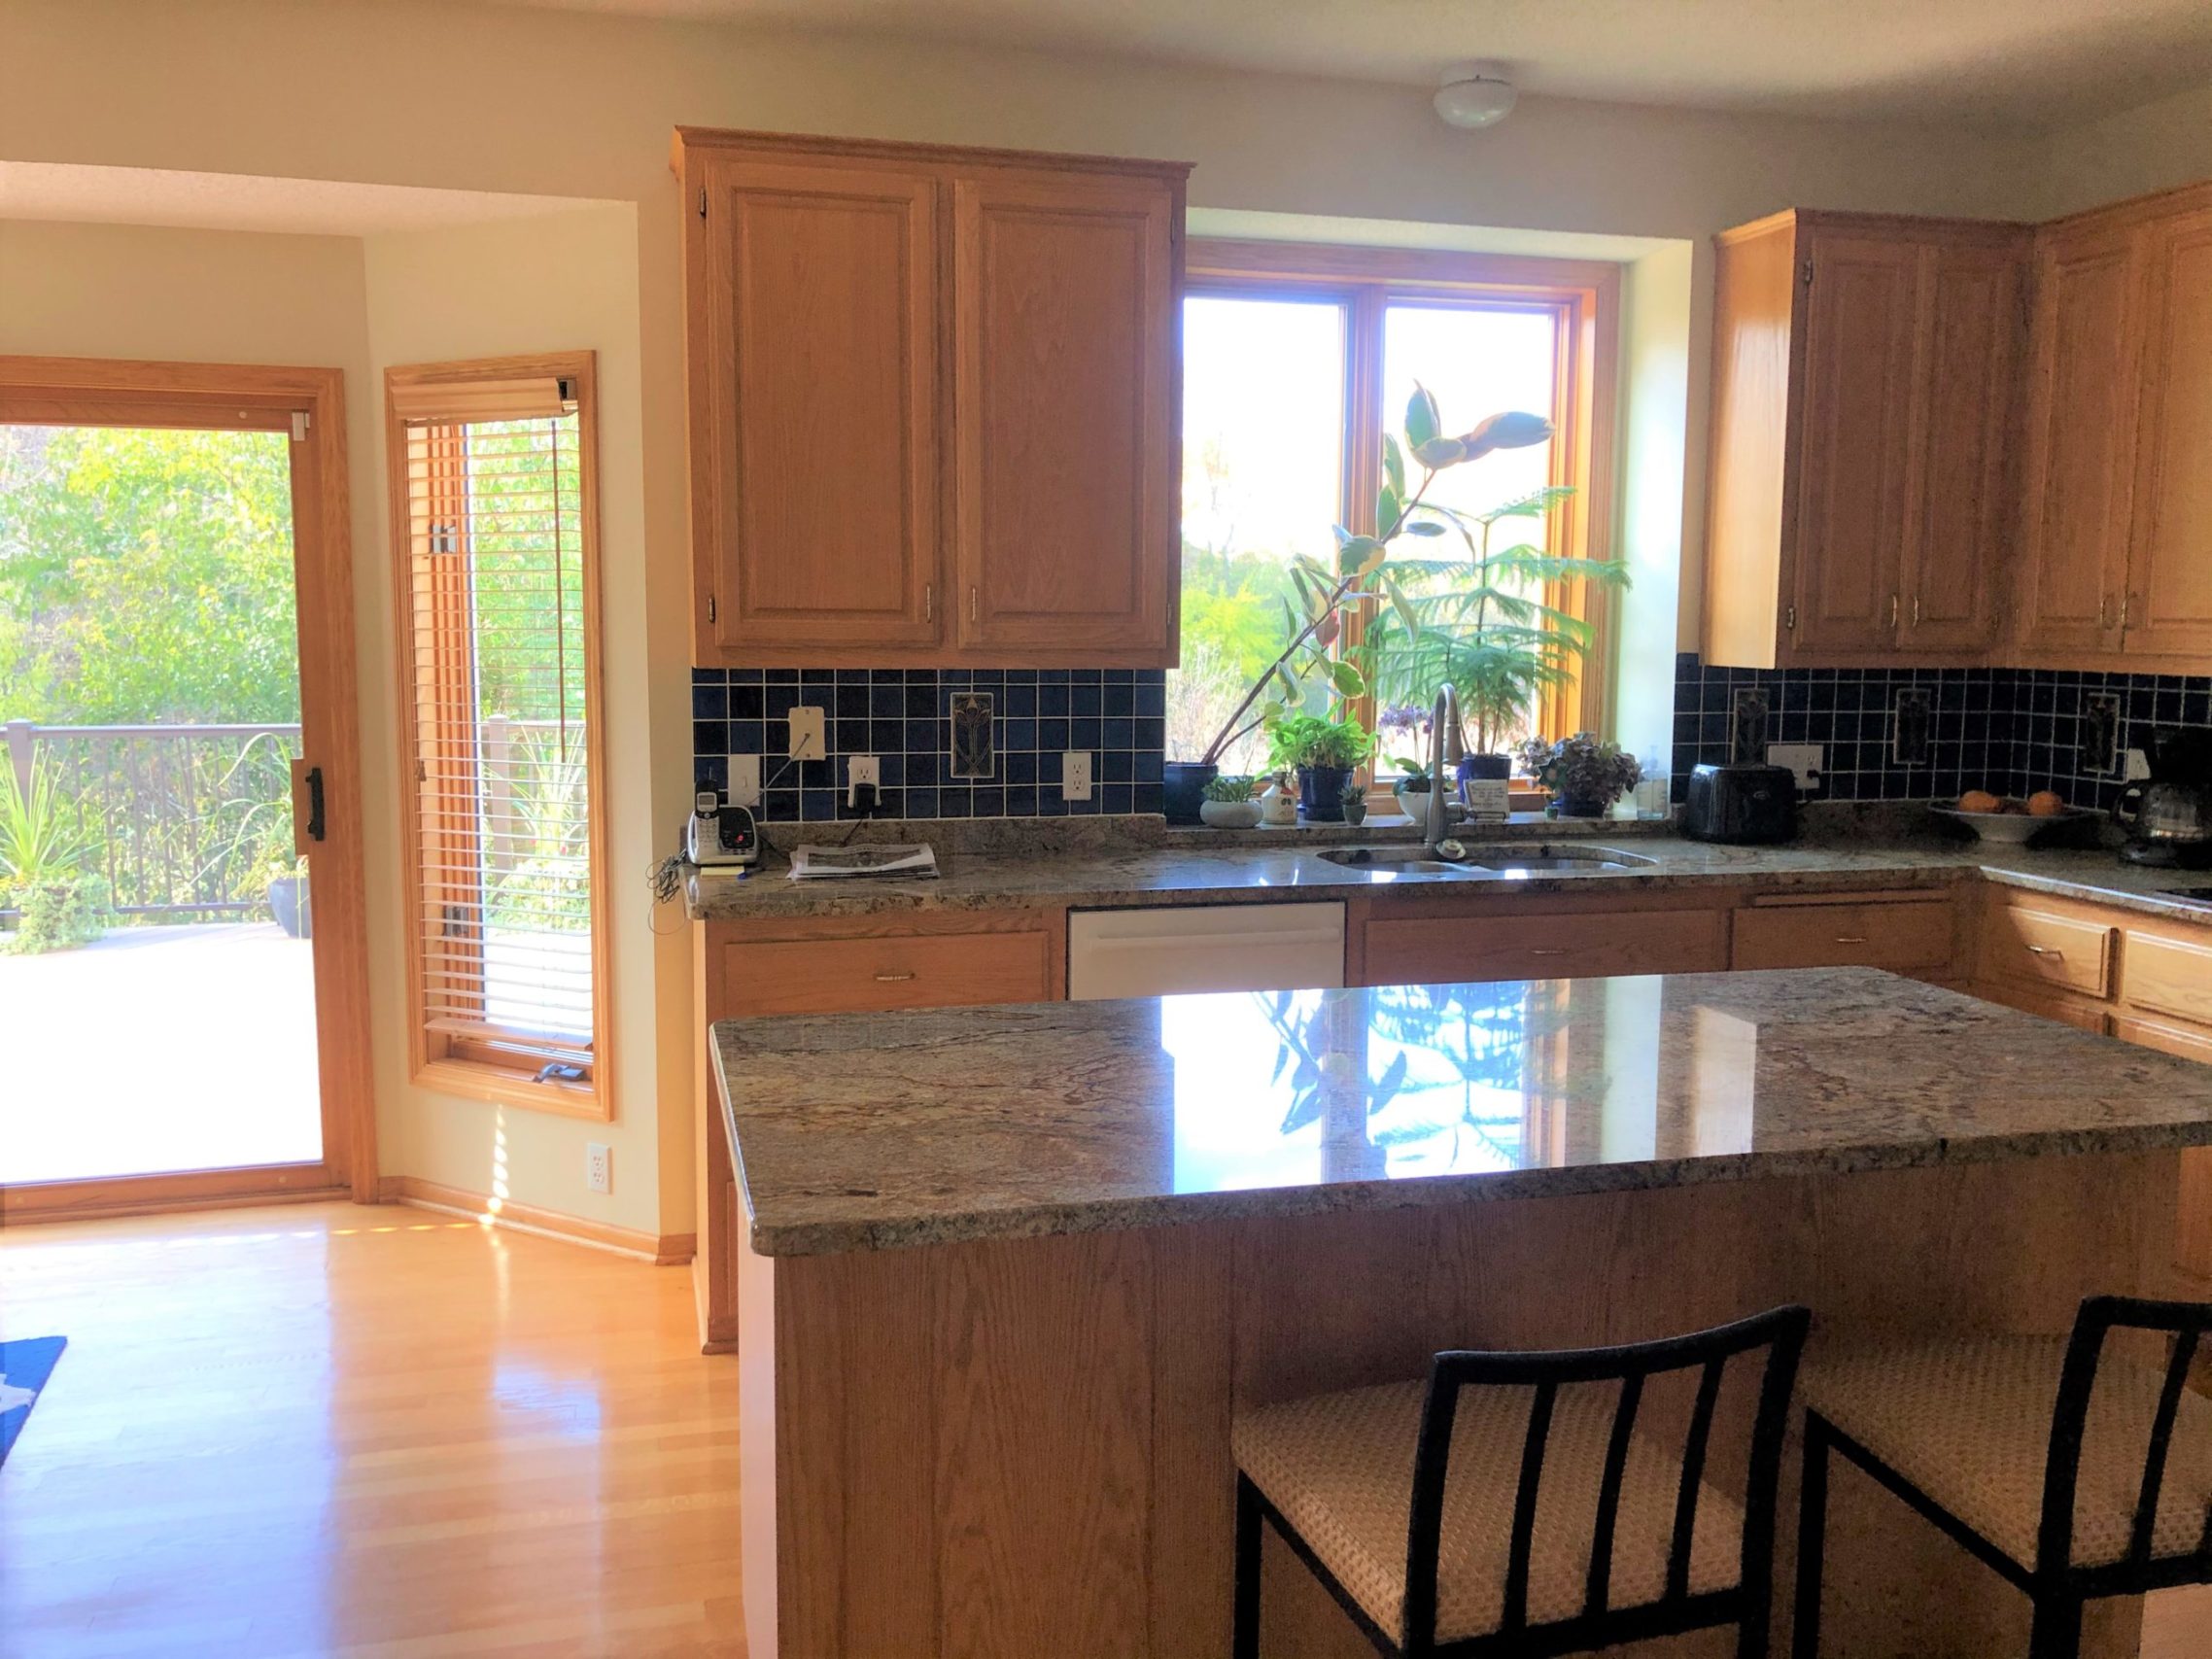 A kitchen remodel with a granite counter top and stainless steel appliances.